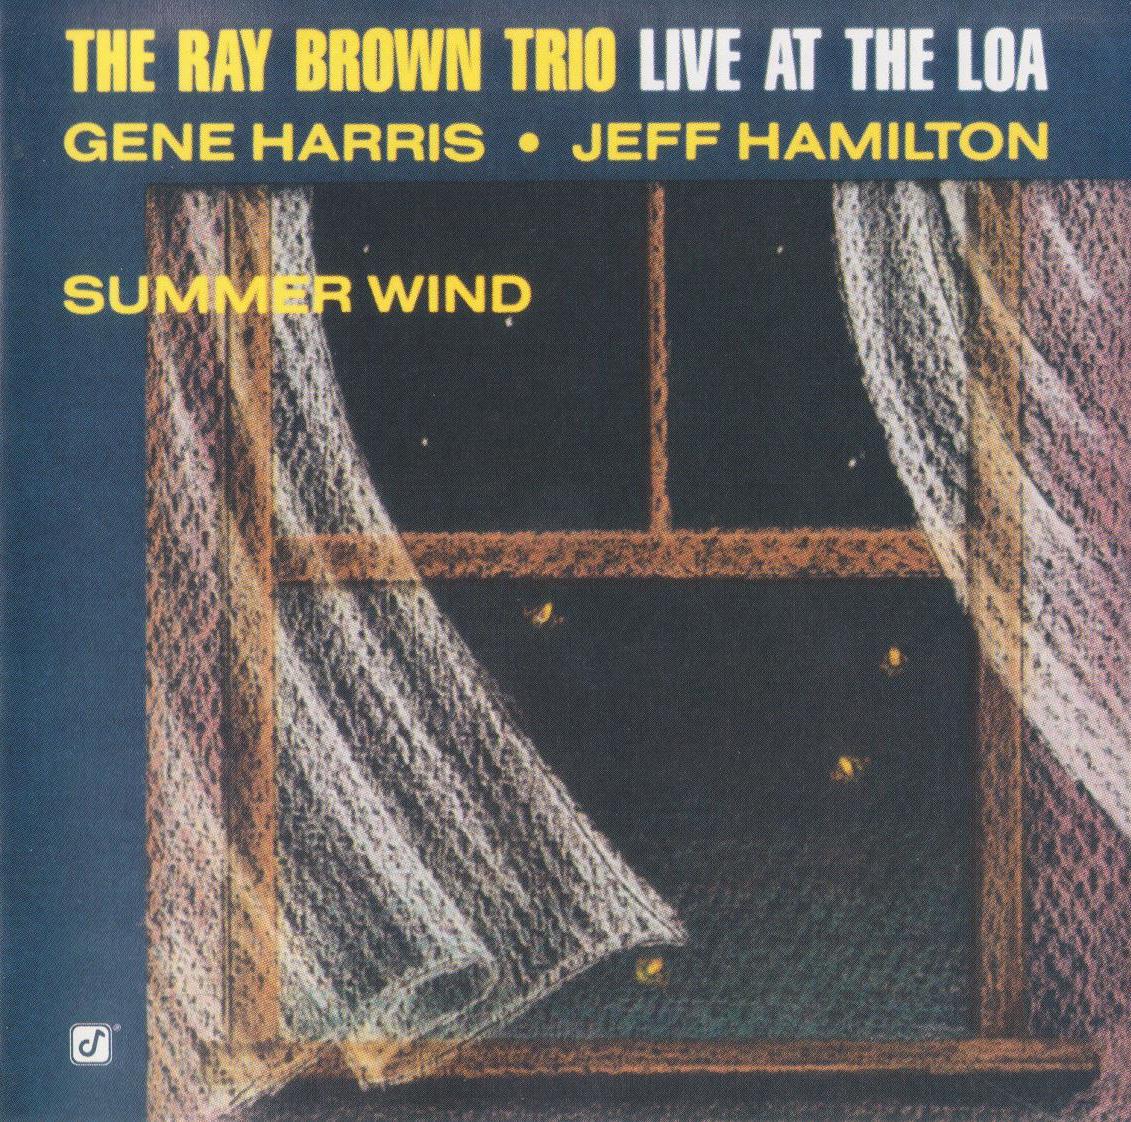 Ray Brown Trio - Summer Wind Live at The Loa (2003) {SACD ISO + FLAC 24bit/88,2kHz}